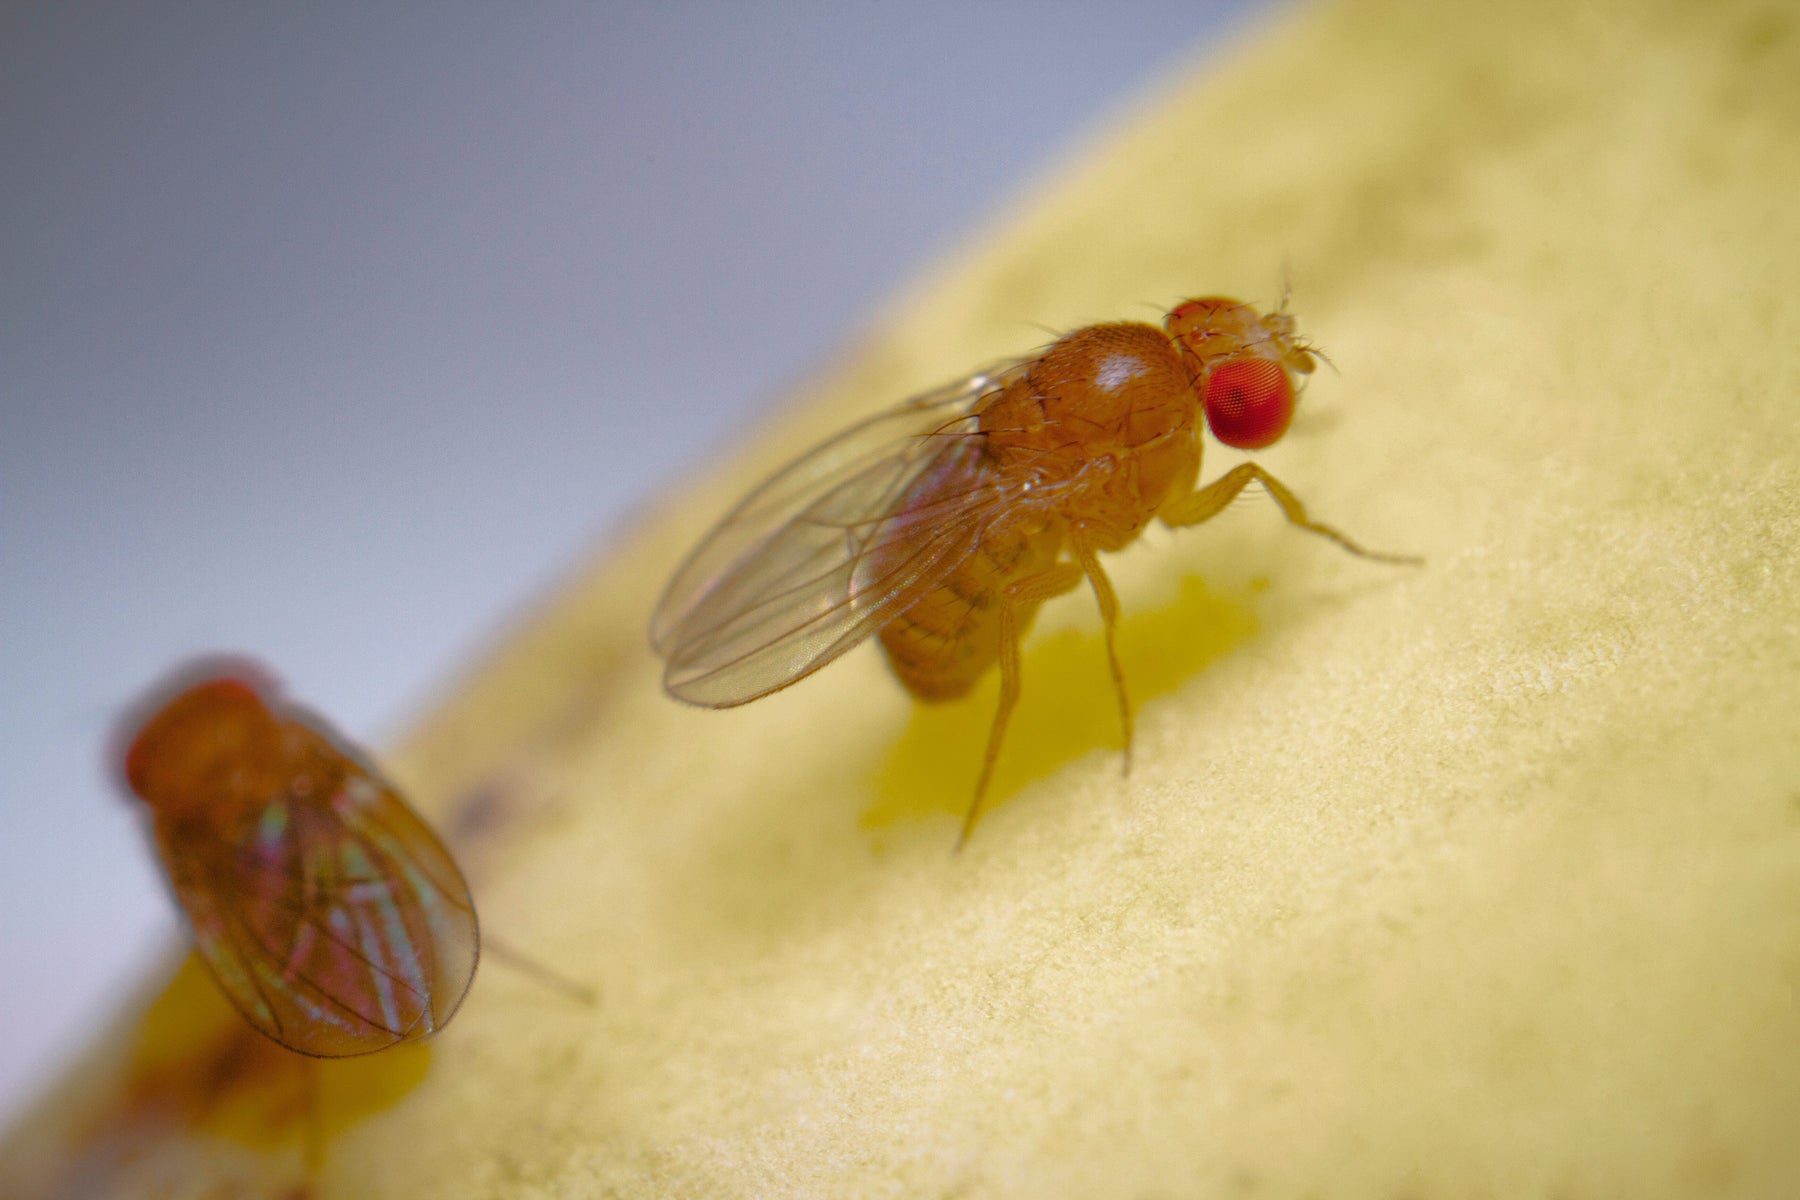 Solving the fruit fly problem